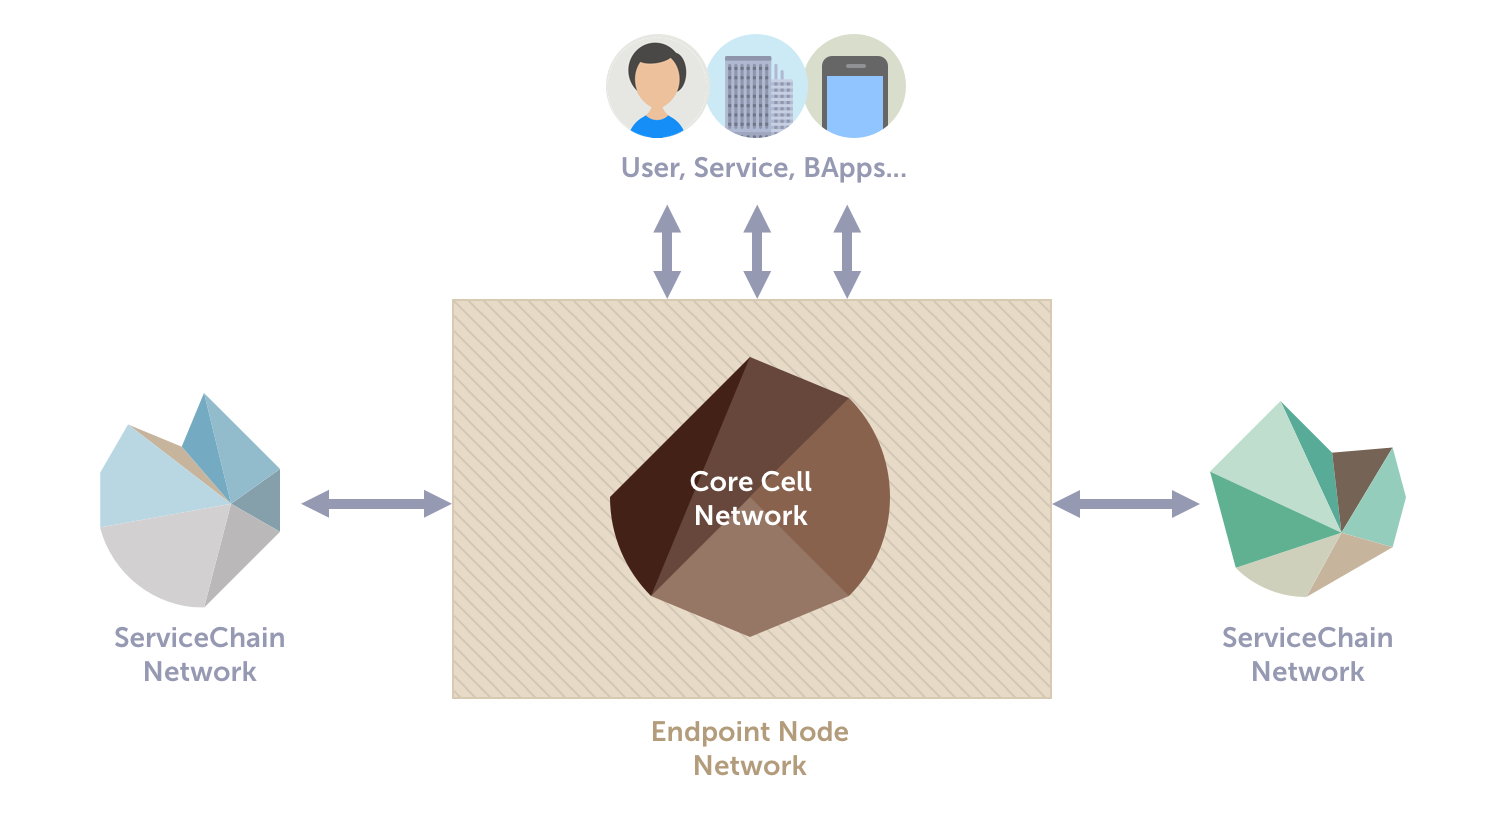 Klaytn Ecosystem and its Logical Subnetworks (CCN, ENN, SCN)